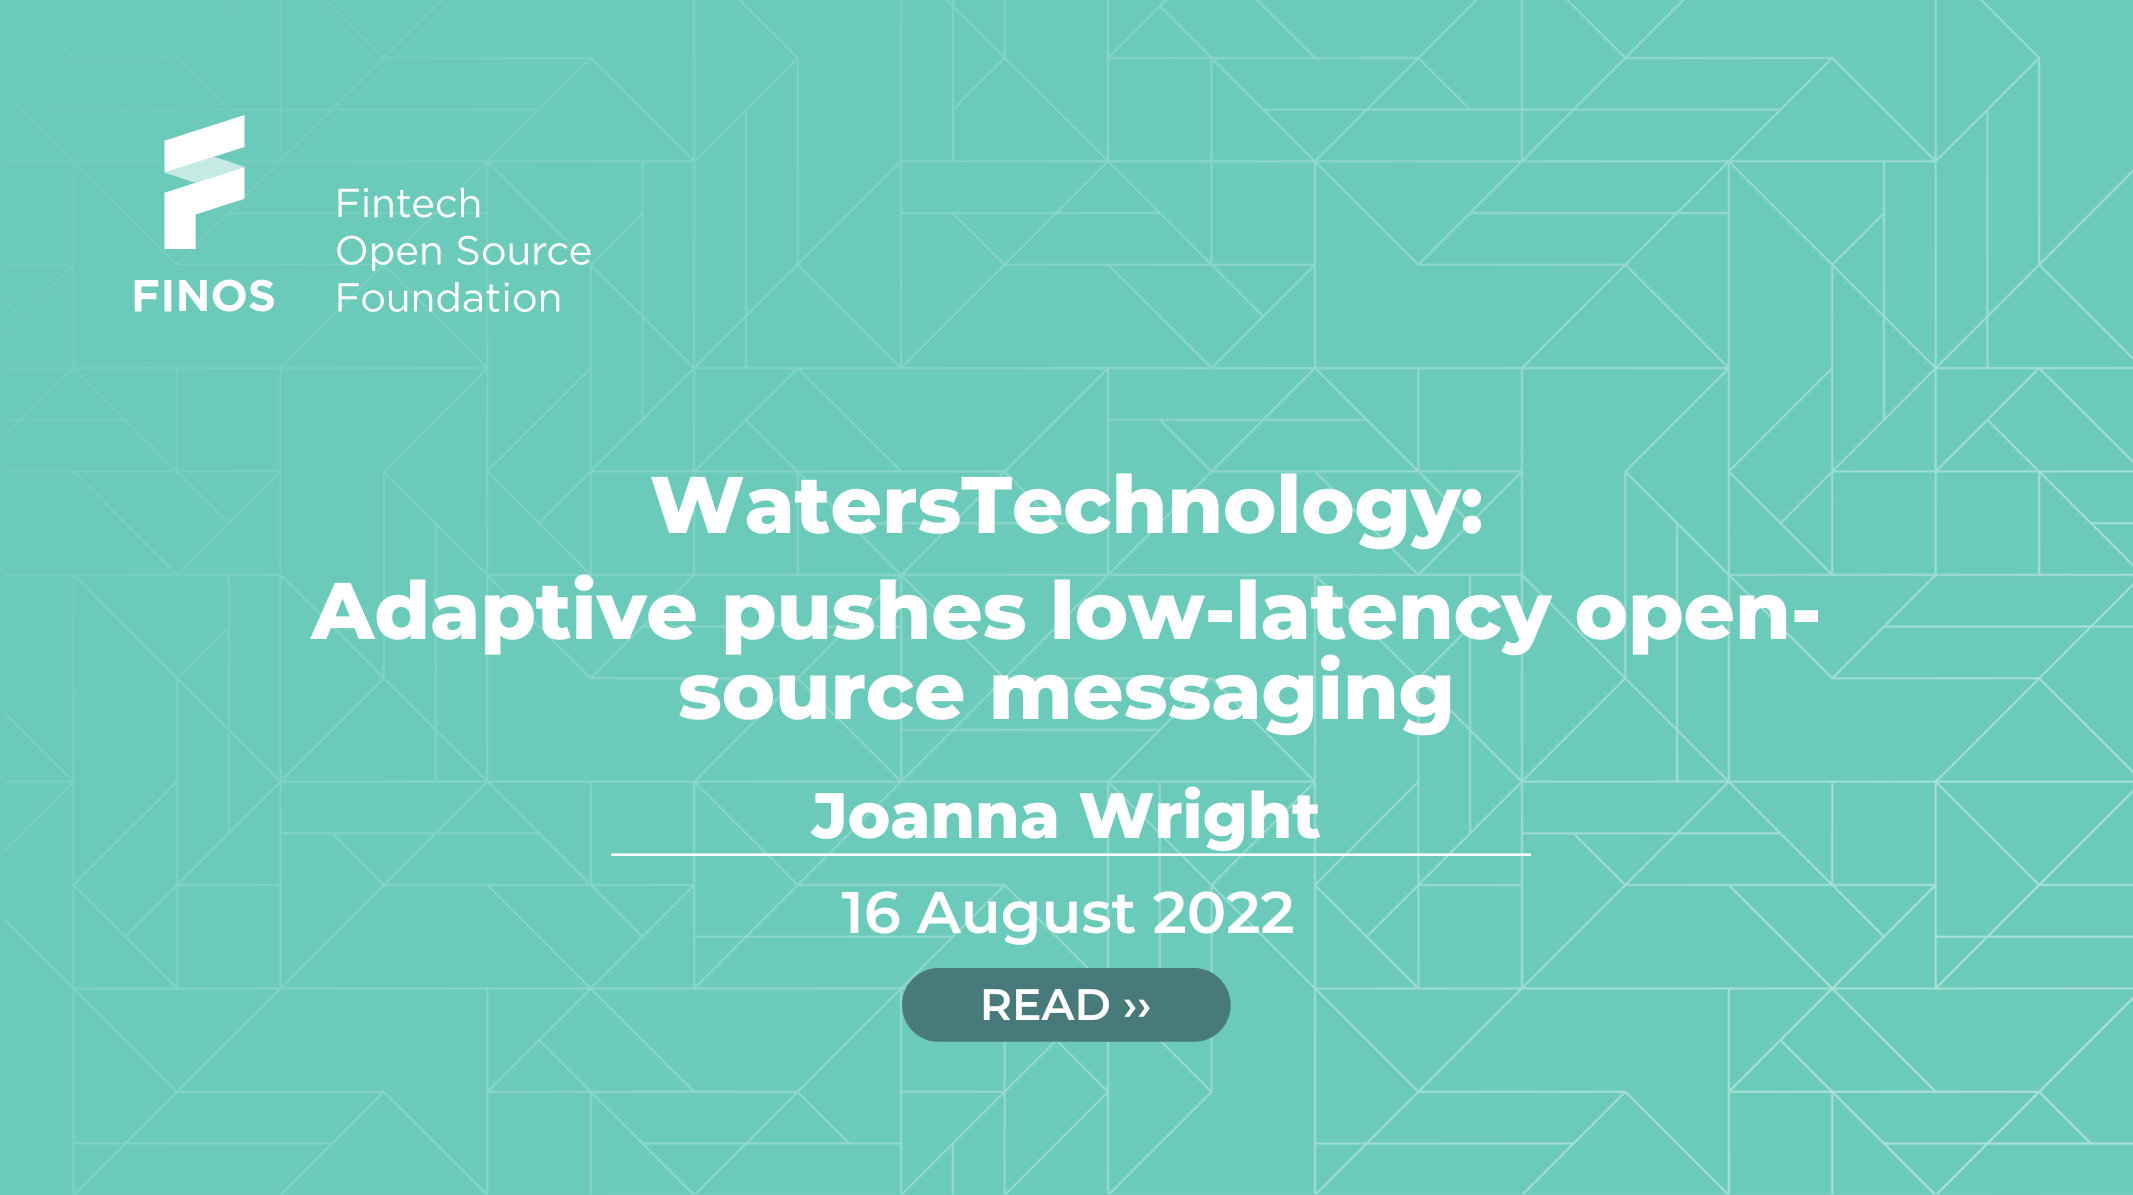 WatersTechnology: Adaptive pushes low-latency open-source messaging